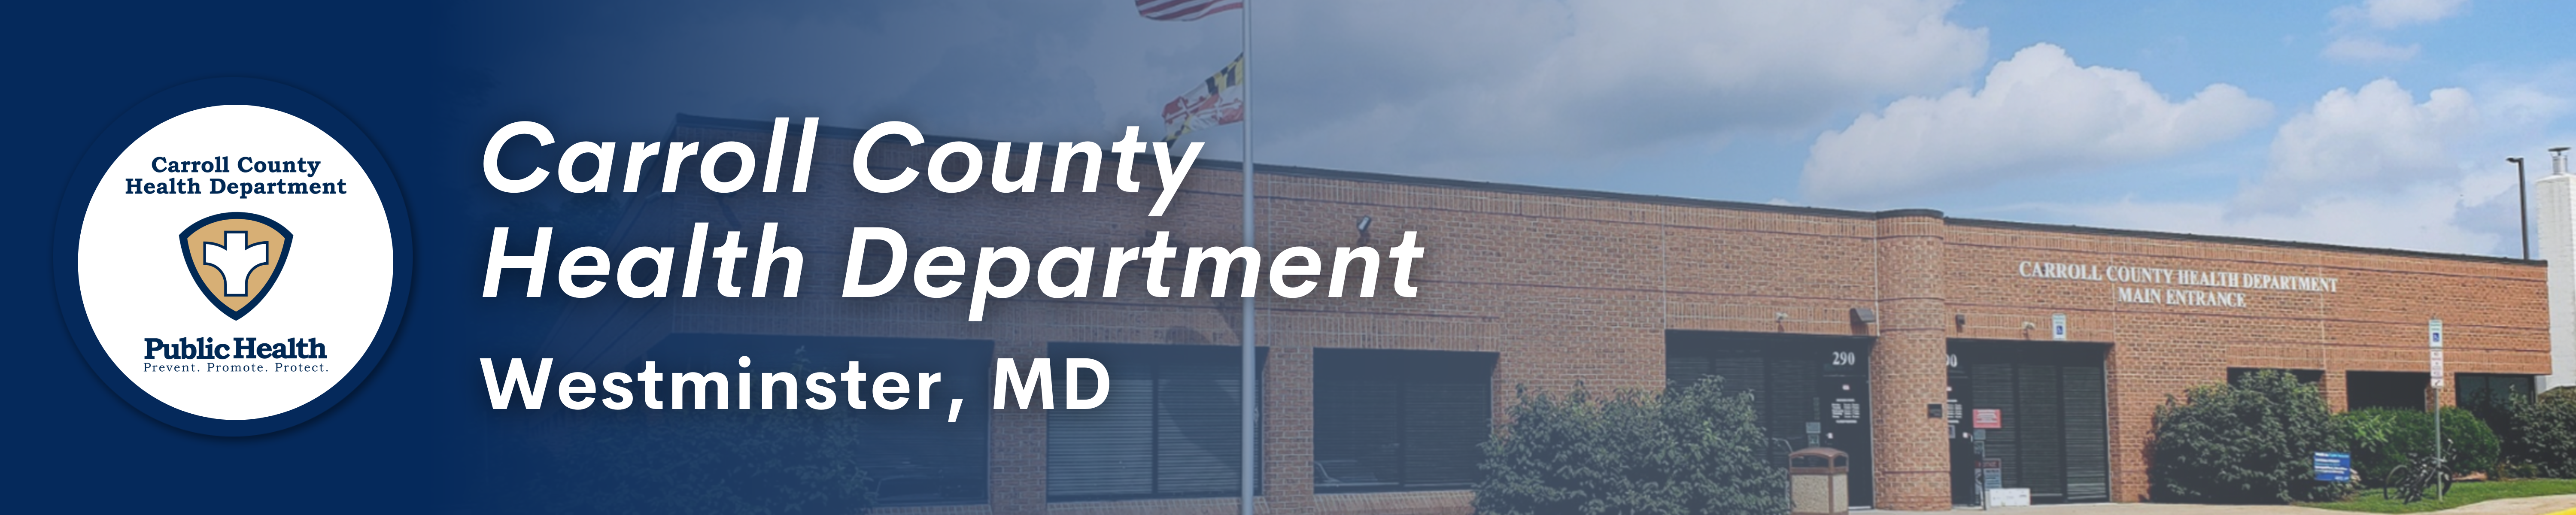 Banner image of Carroll County Health Department Building, with text that says "Carroll County Health Dept., Westminster, MD"